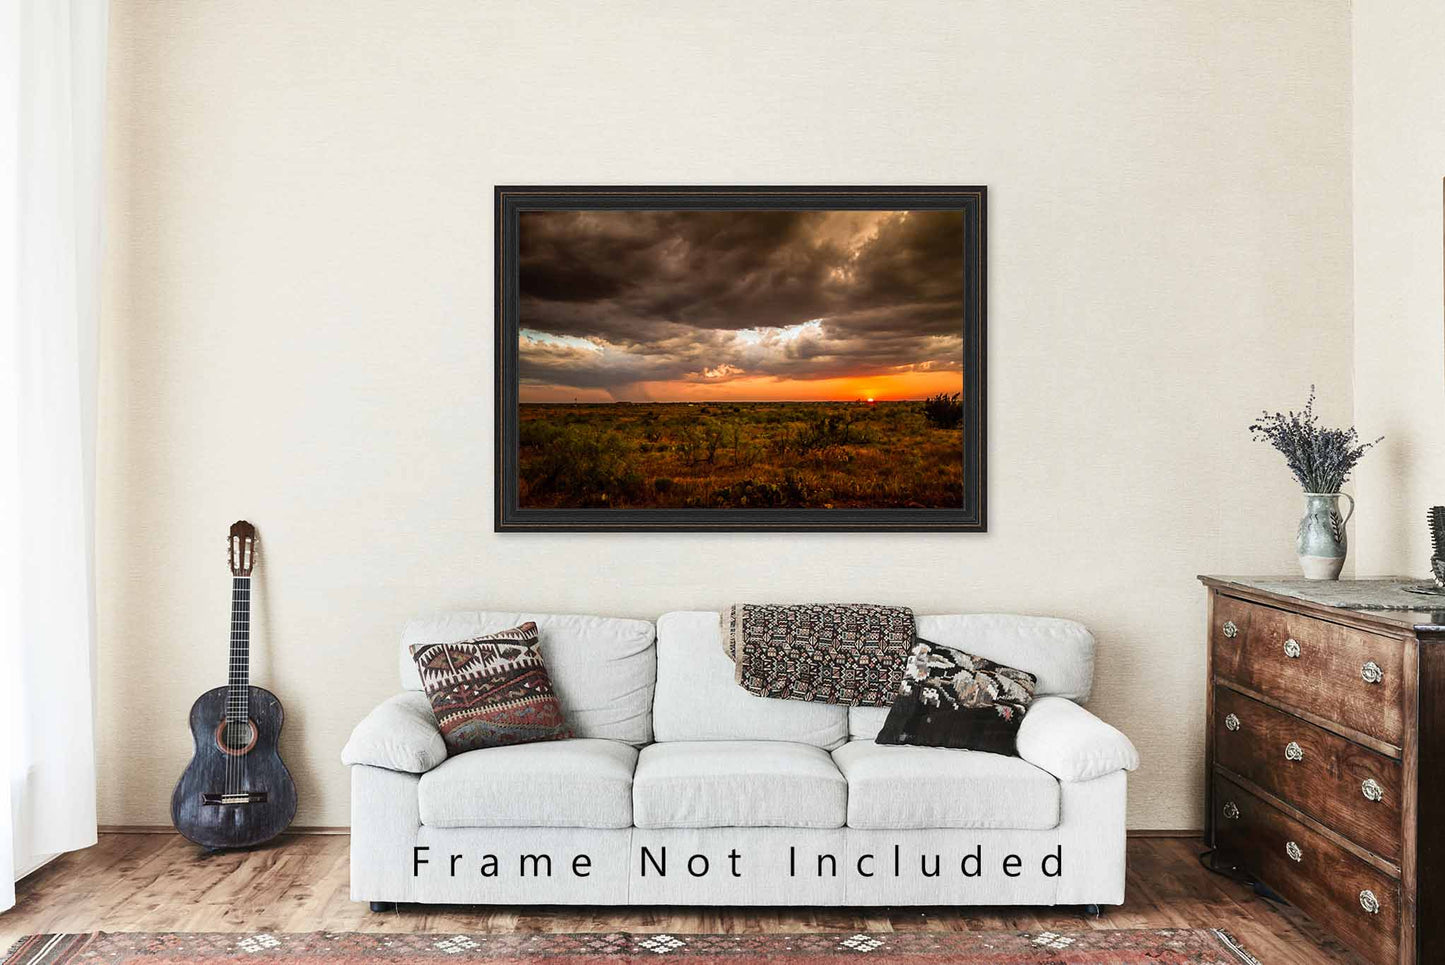 West Texas Photography Art Print - Picture of Scenic Sunset and Distant Rainfall on Stormy Day on Plains Landscape Western Decor